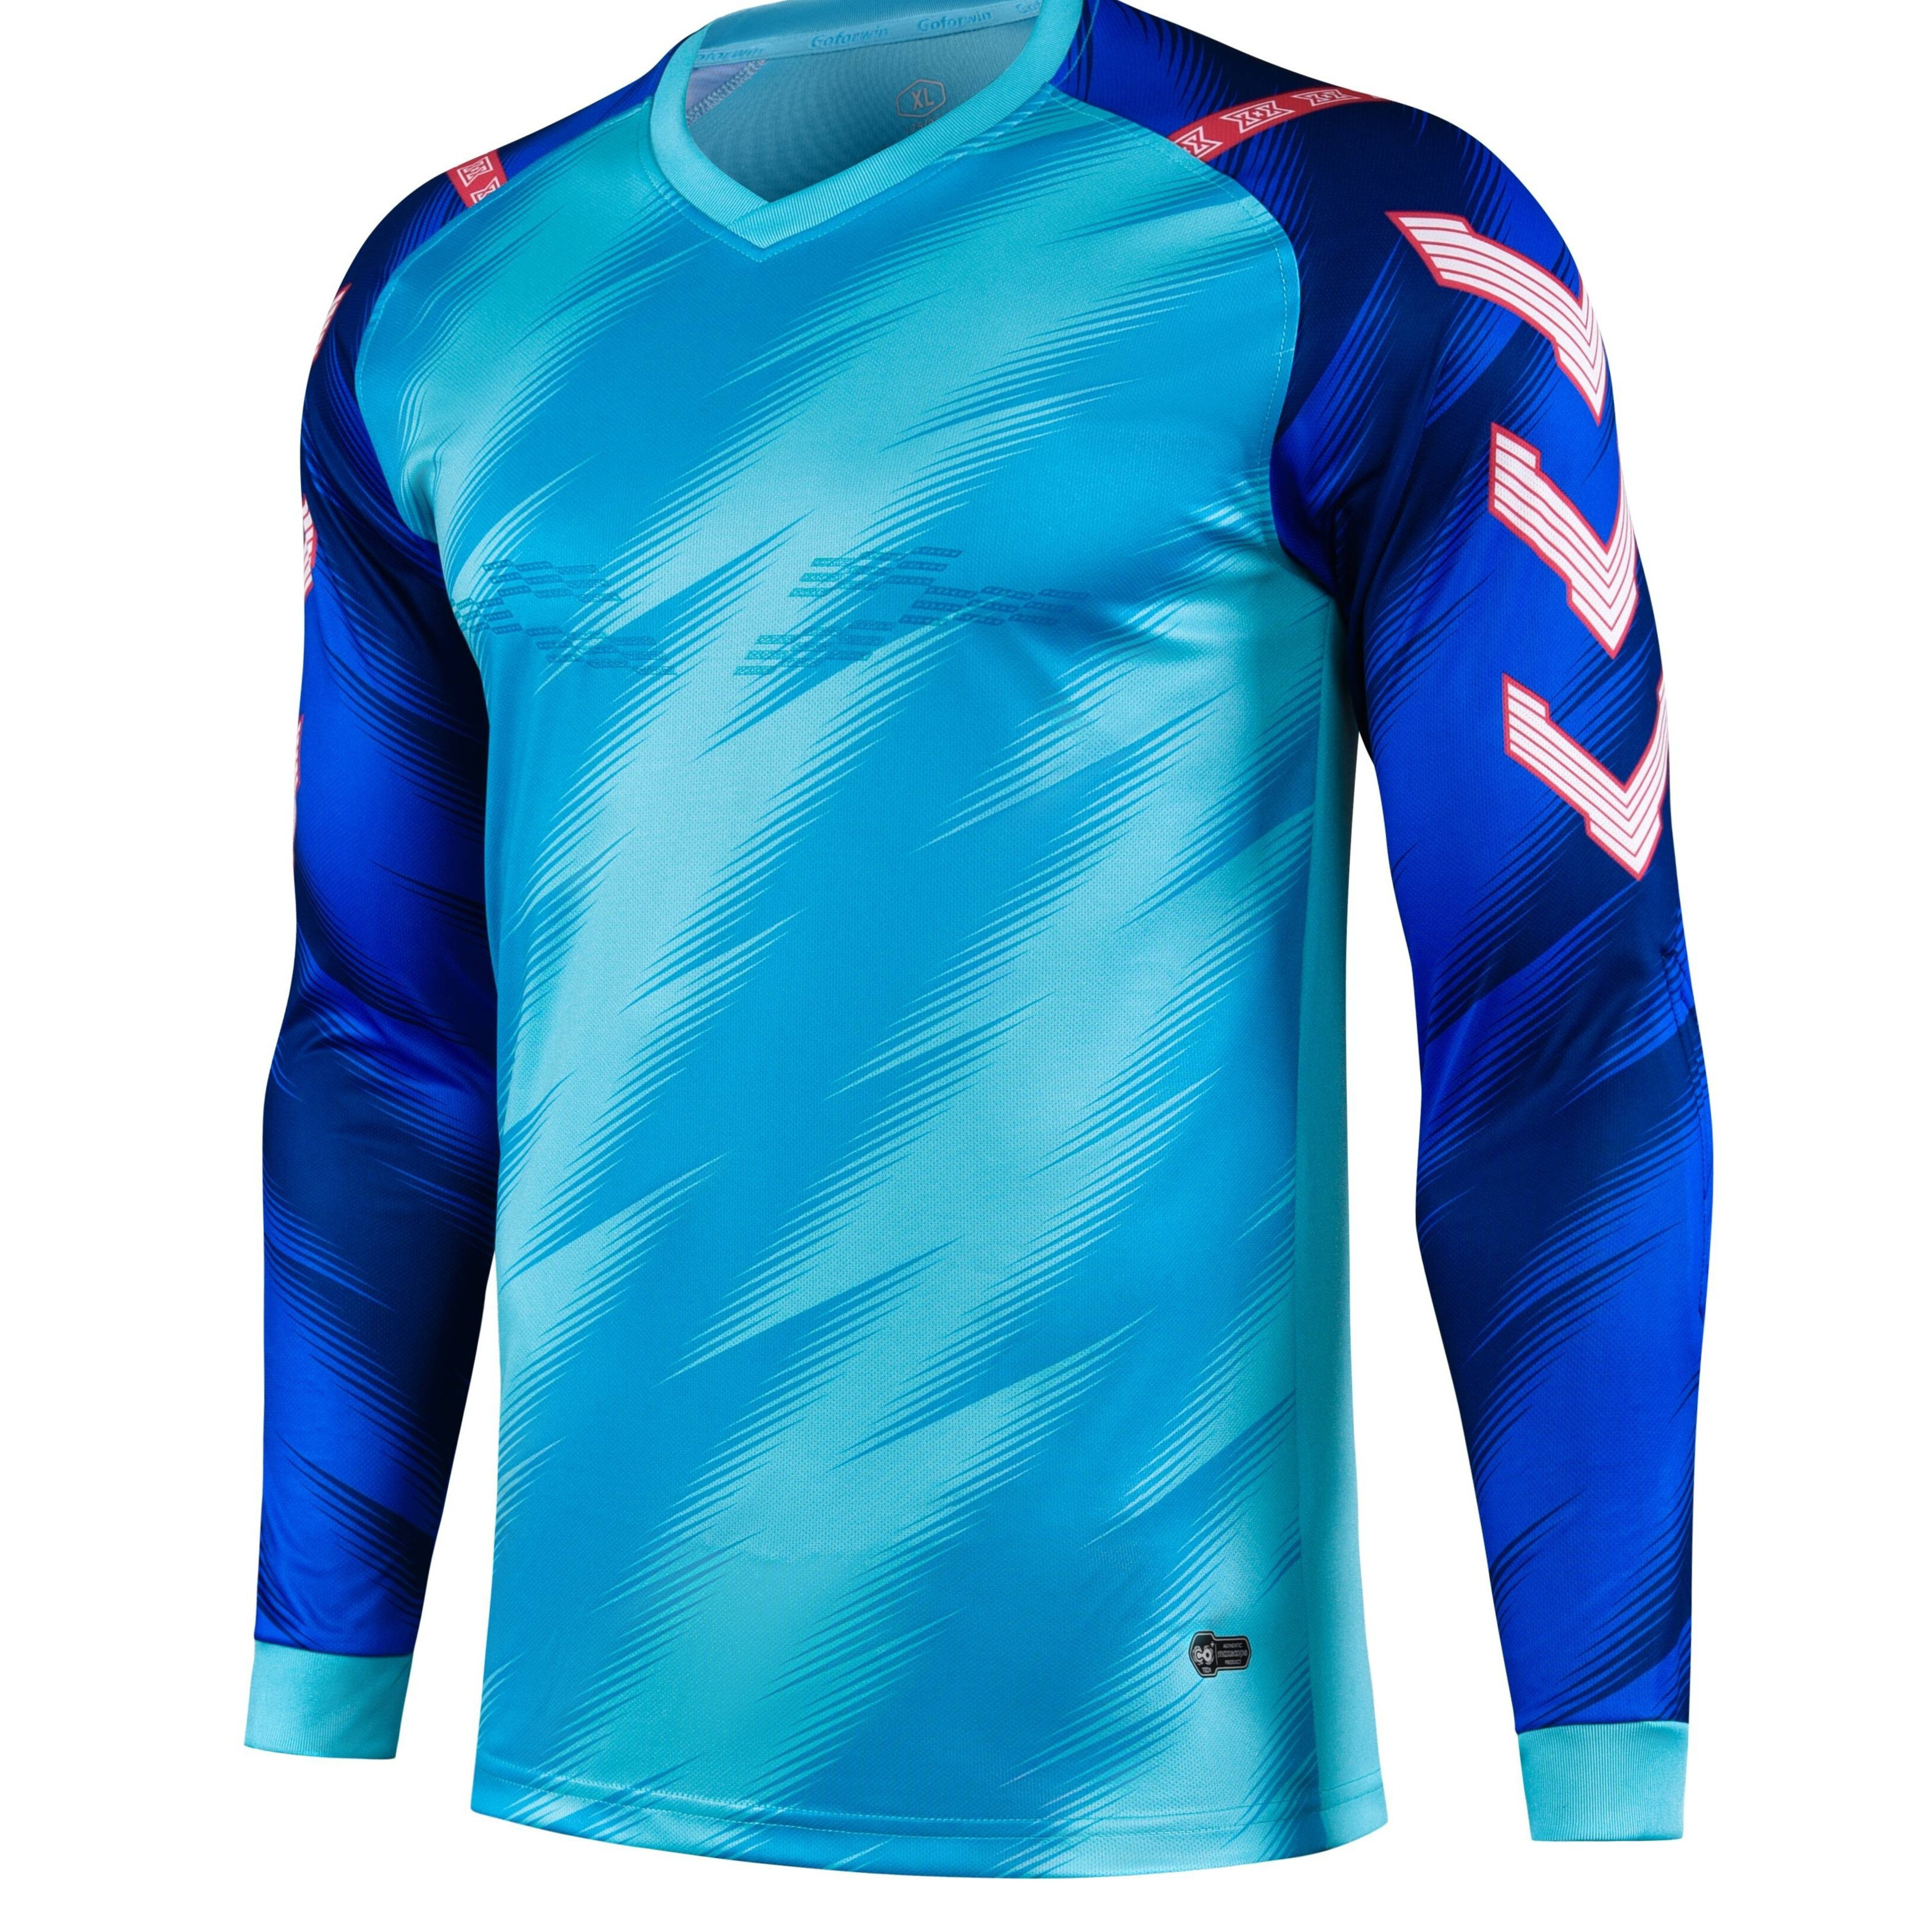 

Men's Long Sleeve Soccer Goalkeeper Jersey With Chest And Elbow Protection, Color-block & Geometric Stripe, Breathable Athletic Fit